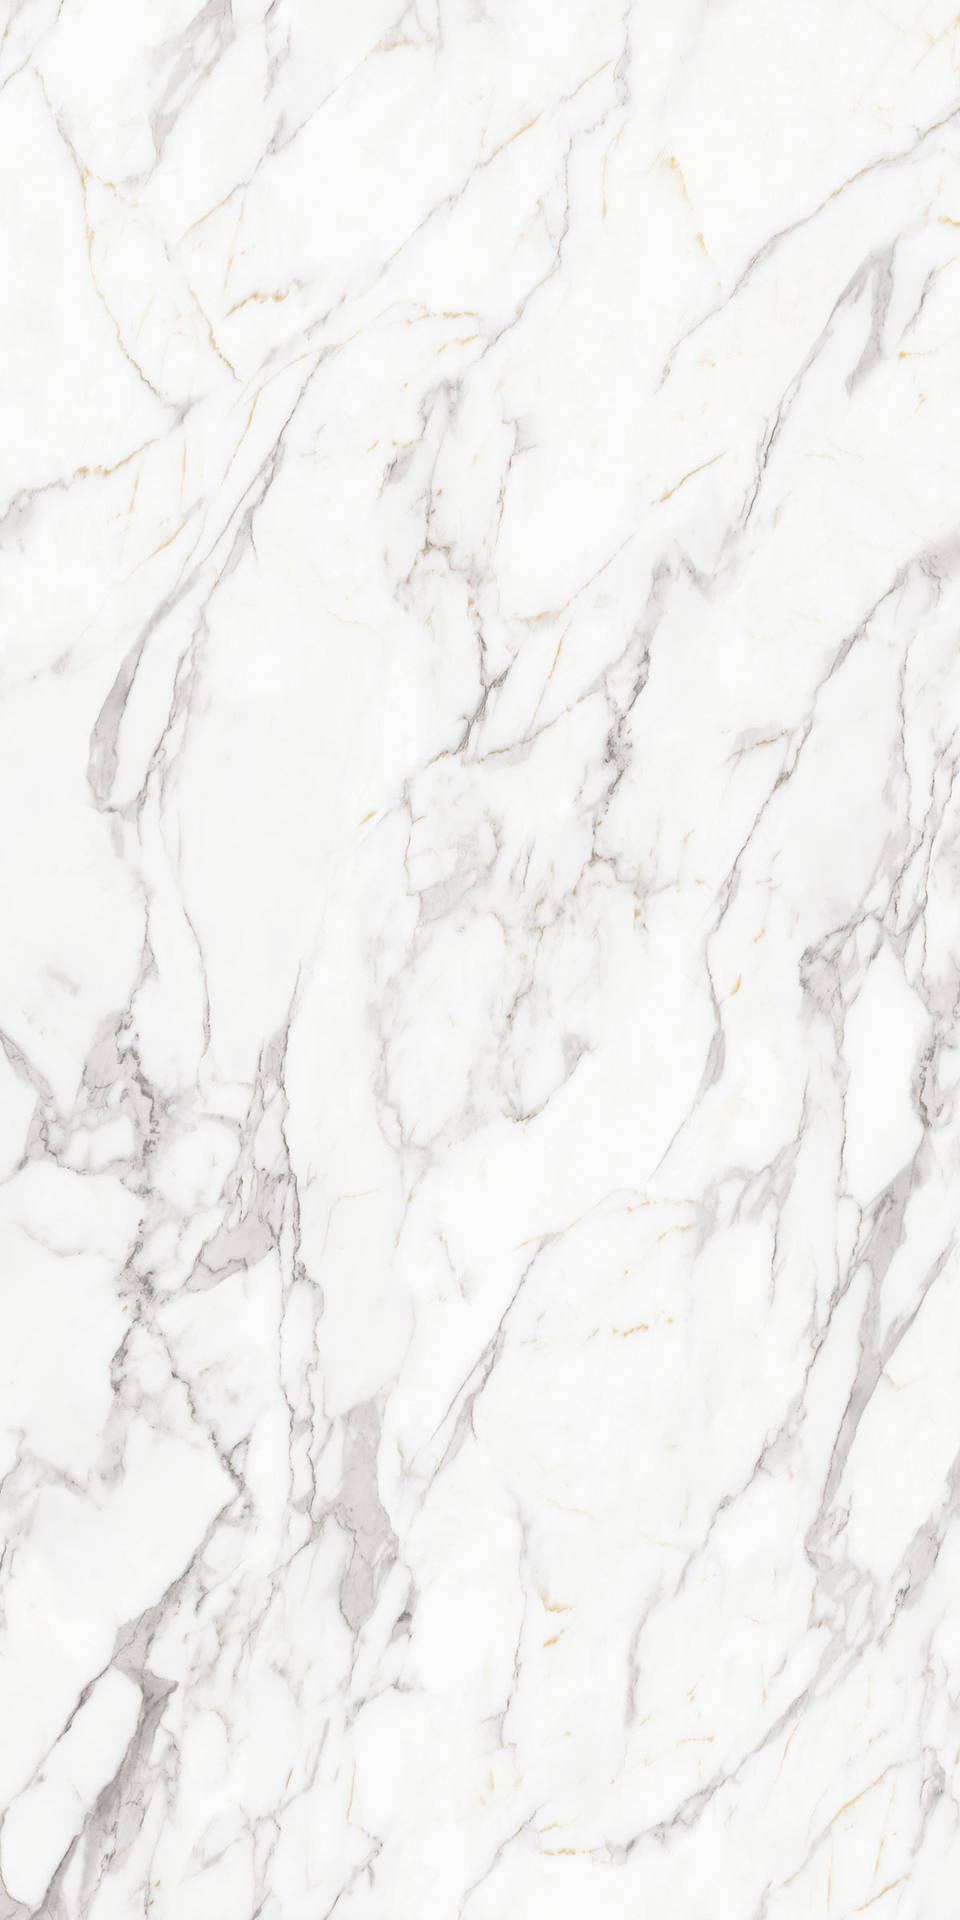 Shine bright with white marble patterns. Wallpaper